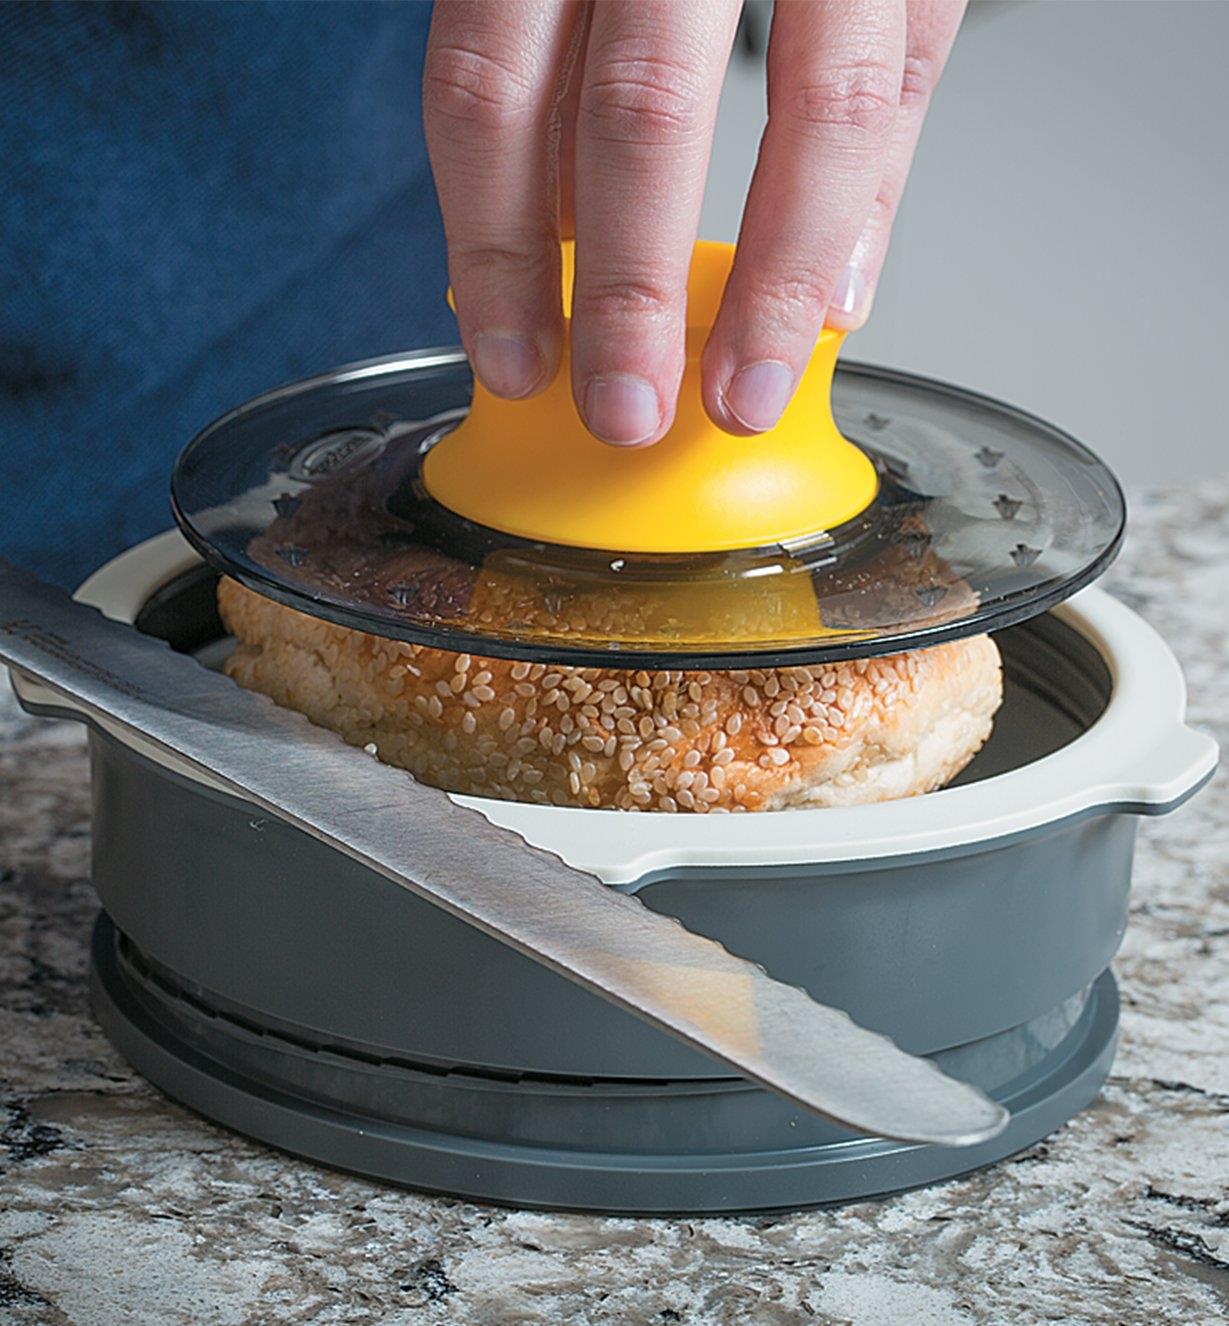 Slicing a bagel in the Bagel Slicing Guide